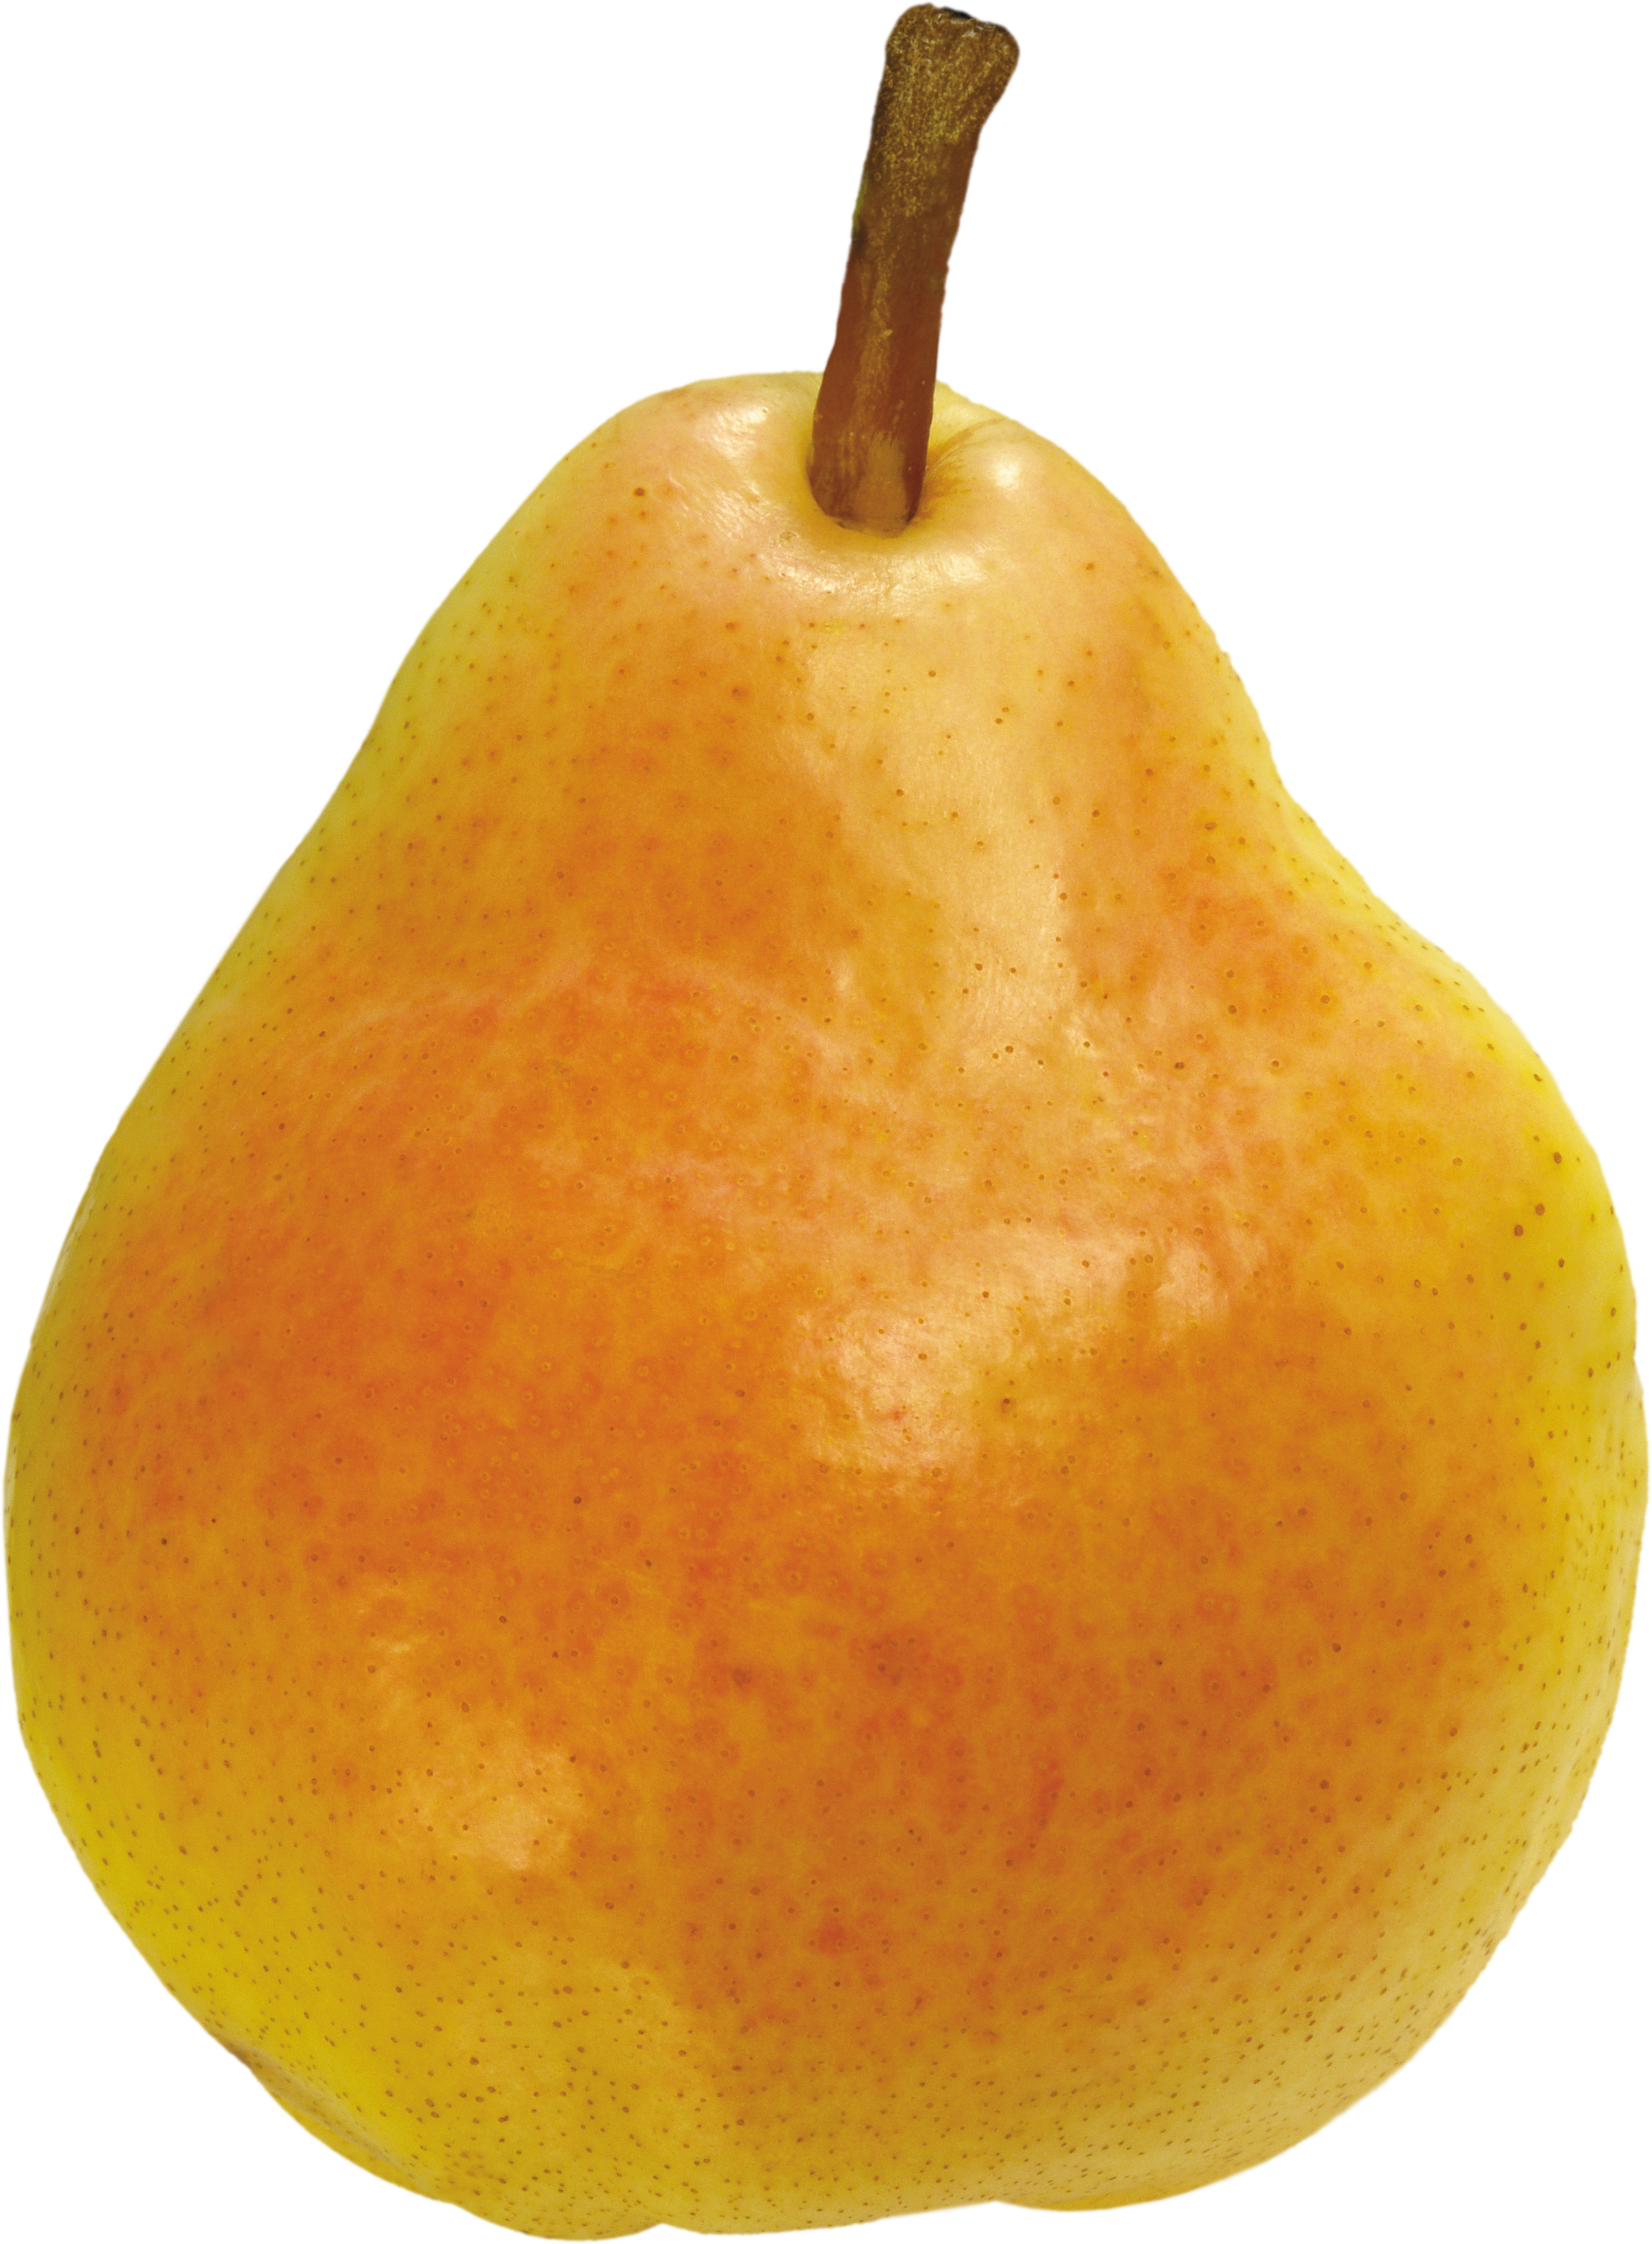 Ripe pear PNG image